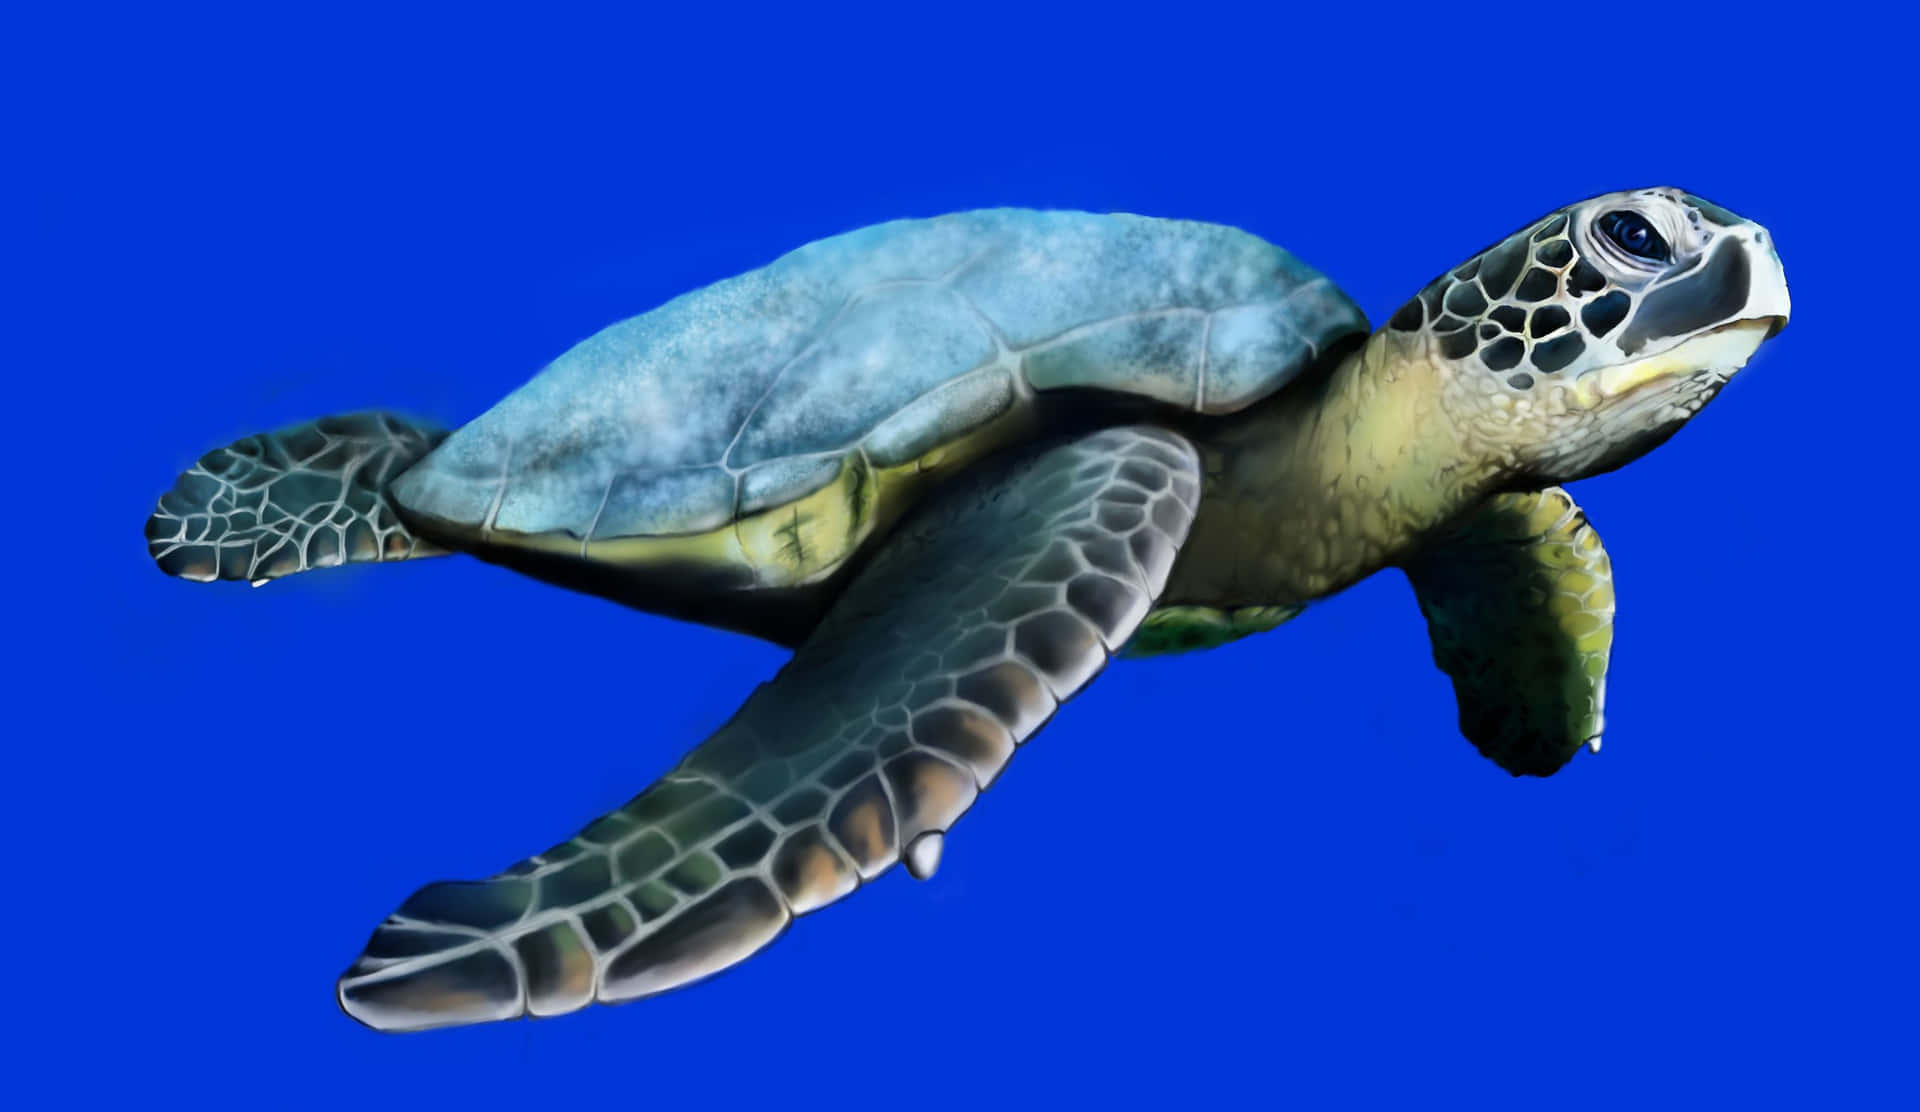 A sea turtle gracefully navigates the warm ocean waters